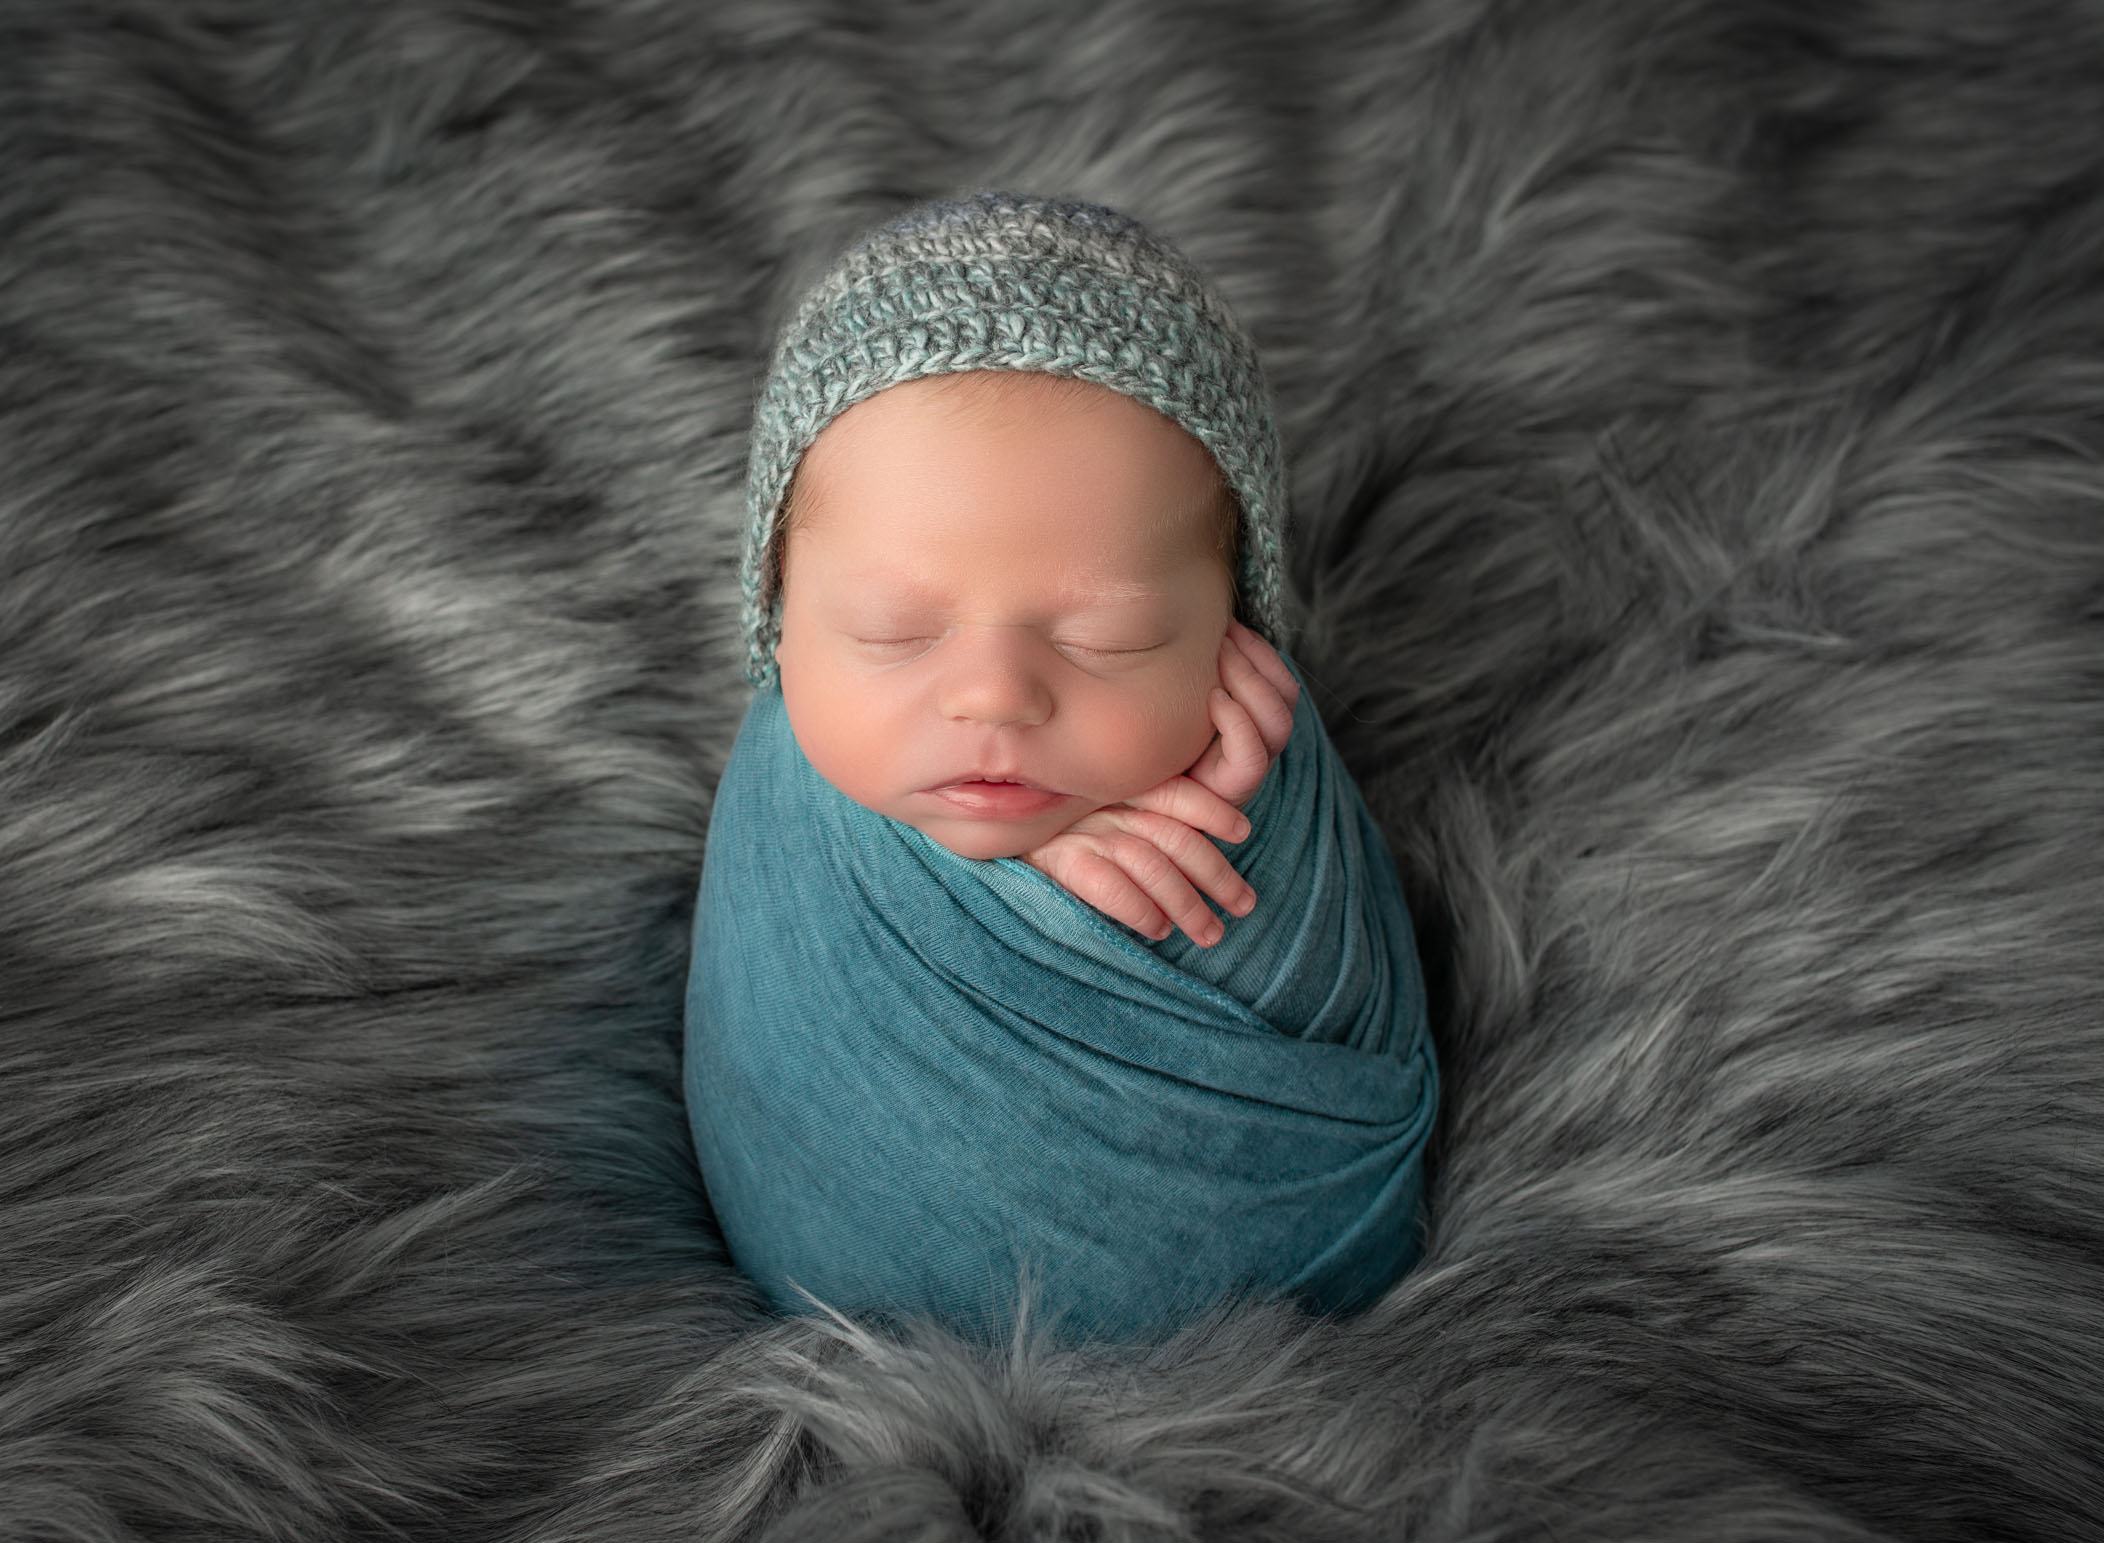 Newborn baby swaddled in teal with matching bonnet in potato sack pose